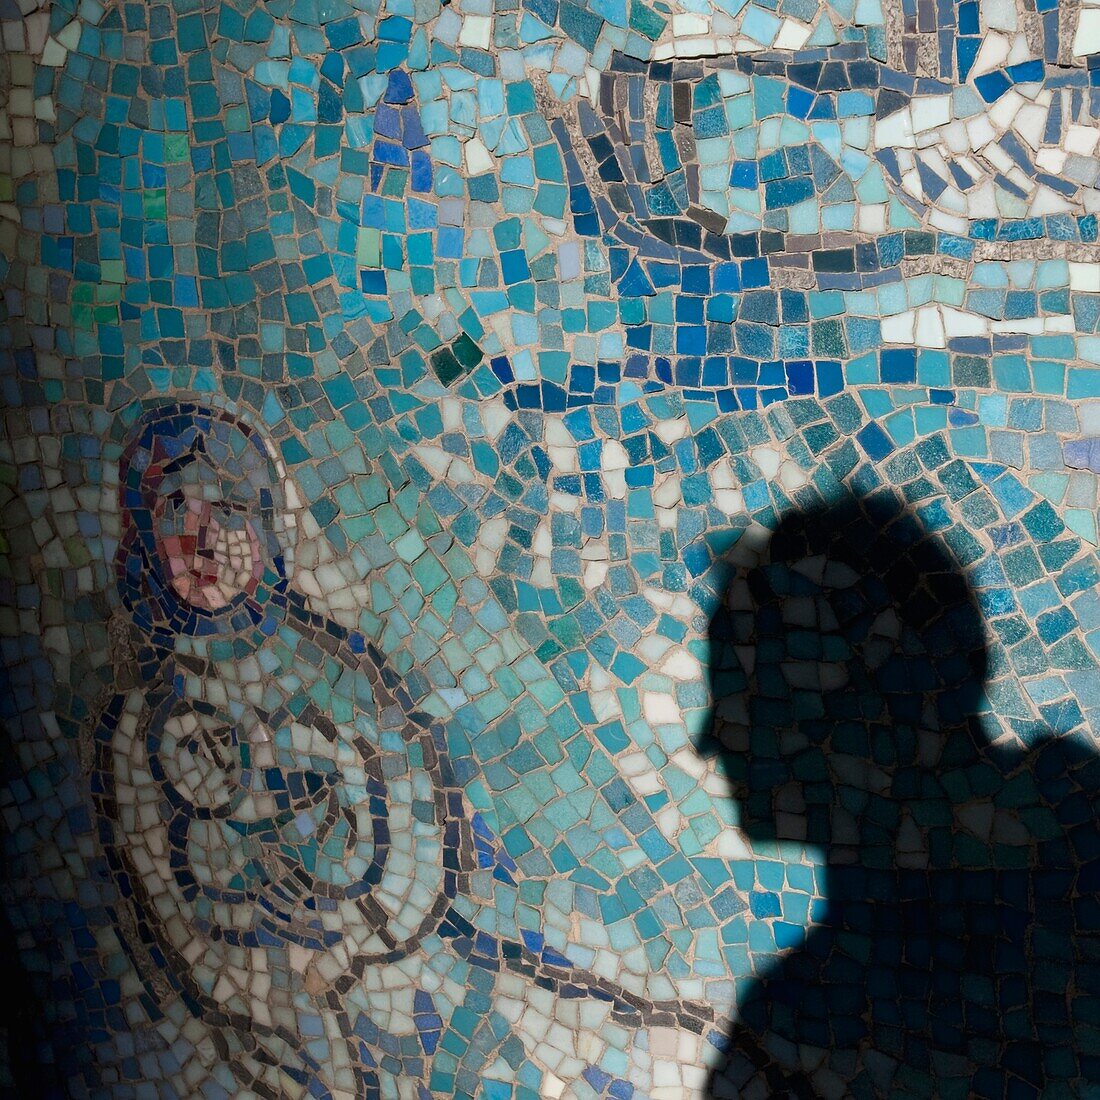 Shadow Of Man On Mosaic Tiles